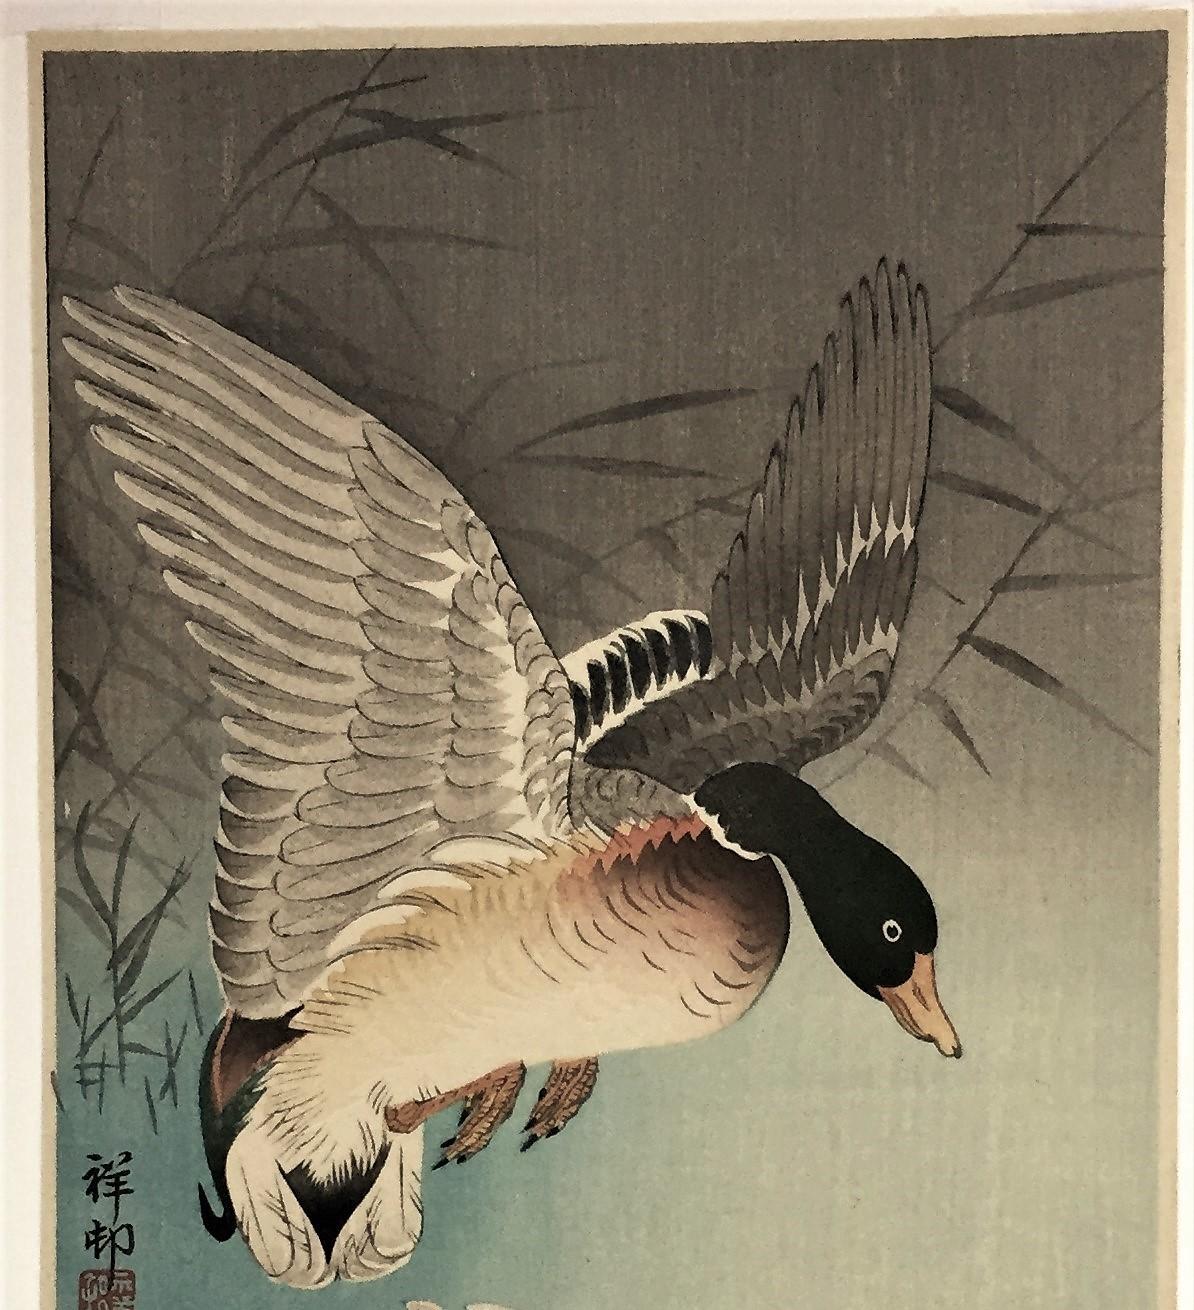 Two Wild Ducks in Flight Above Reeds, a Full Moon Behind. - Print by Ohara Koson